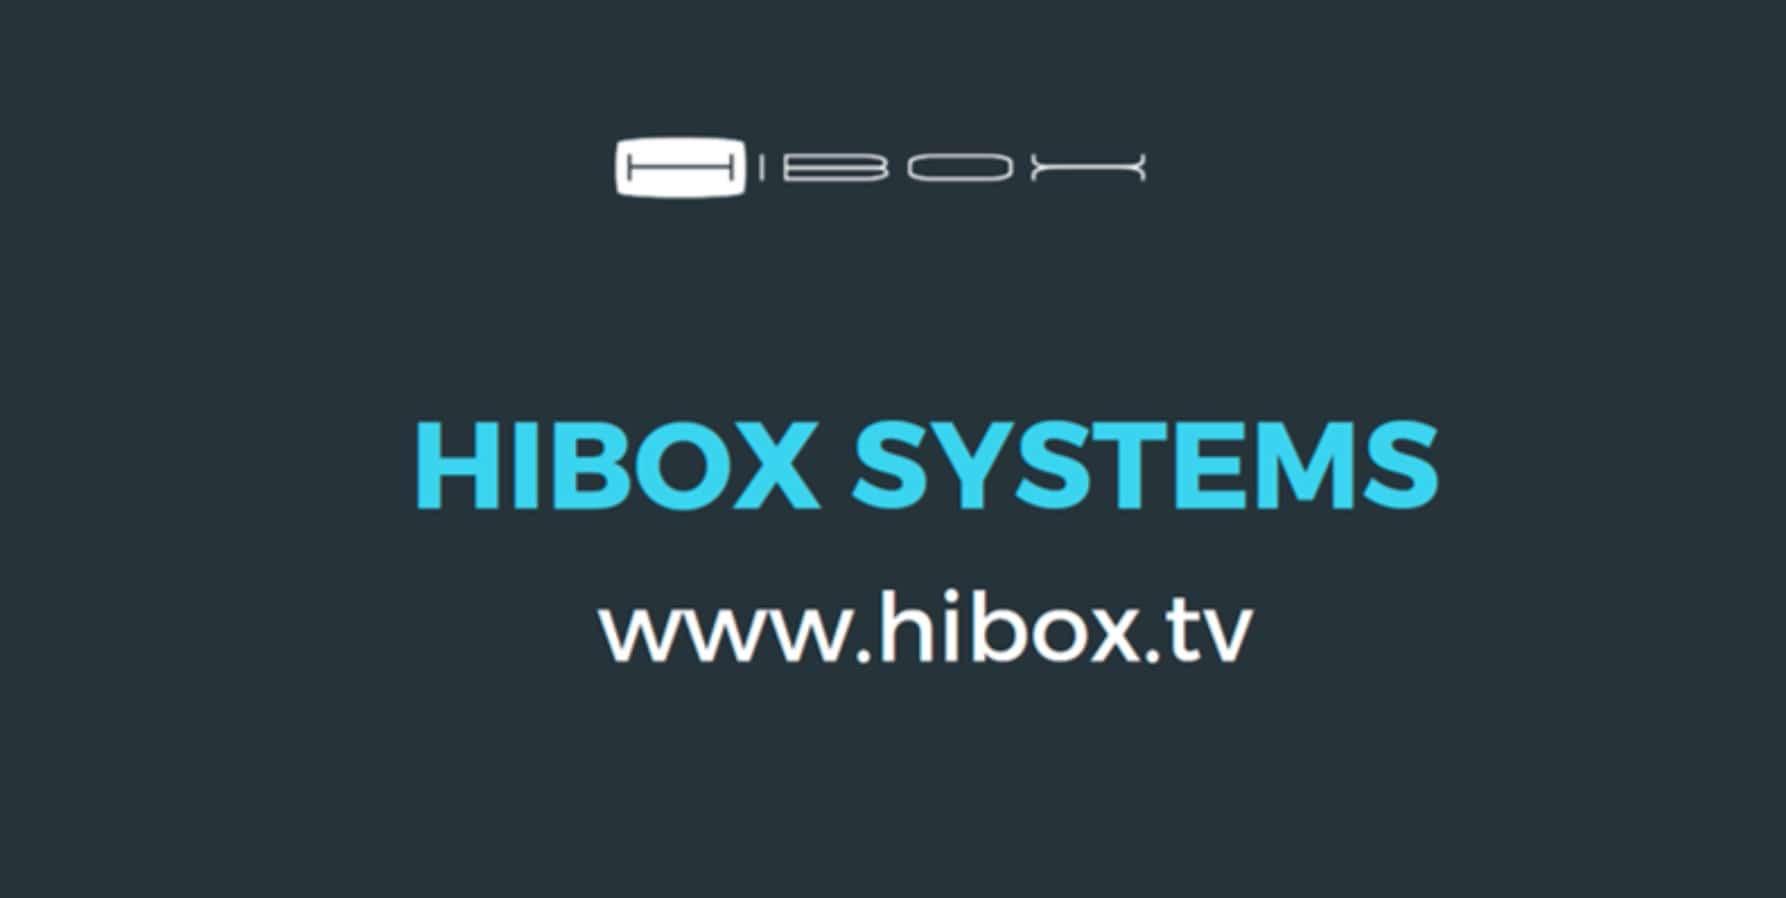 TRUST Advised Viria Oyj in the sale of Hibox Systems Oy to Accedo AB 1